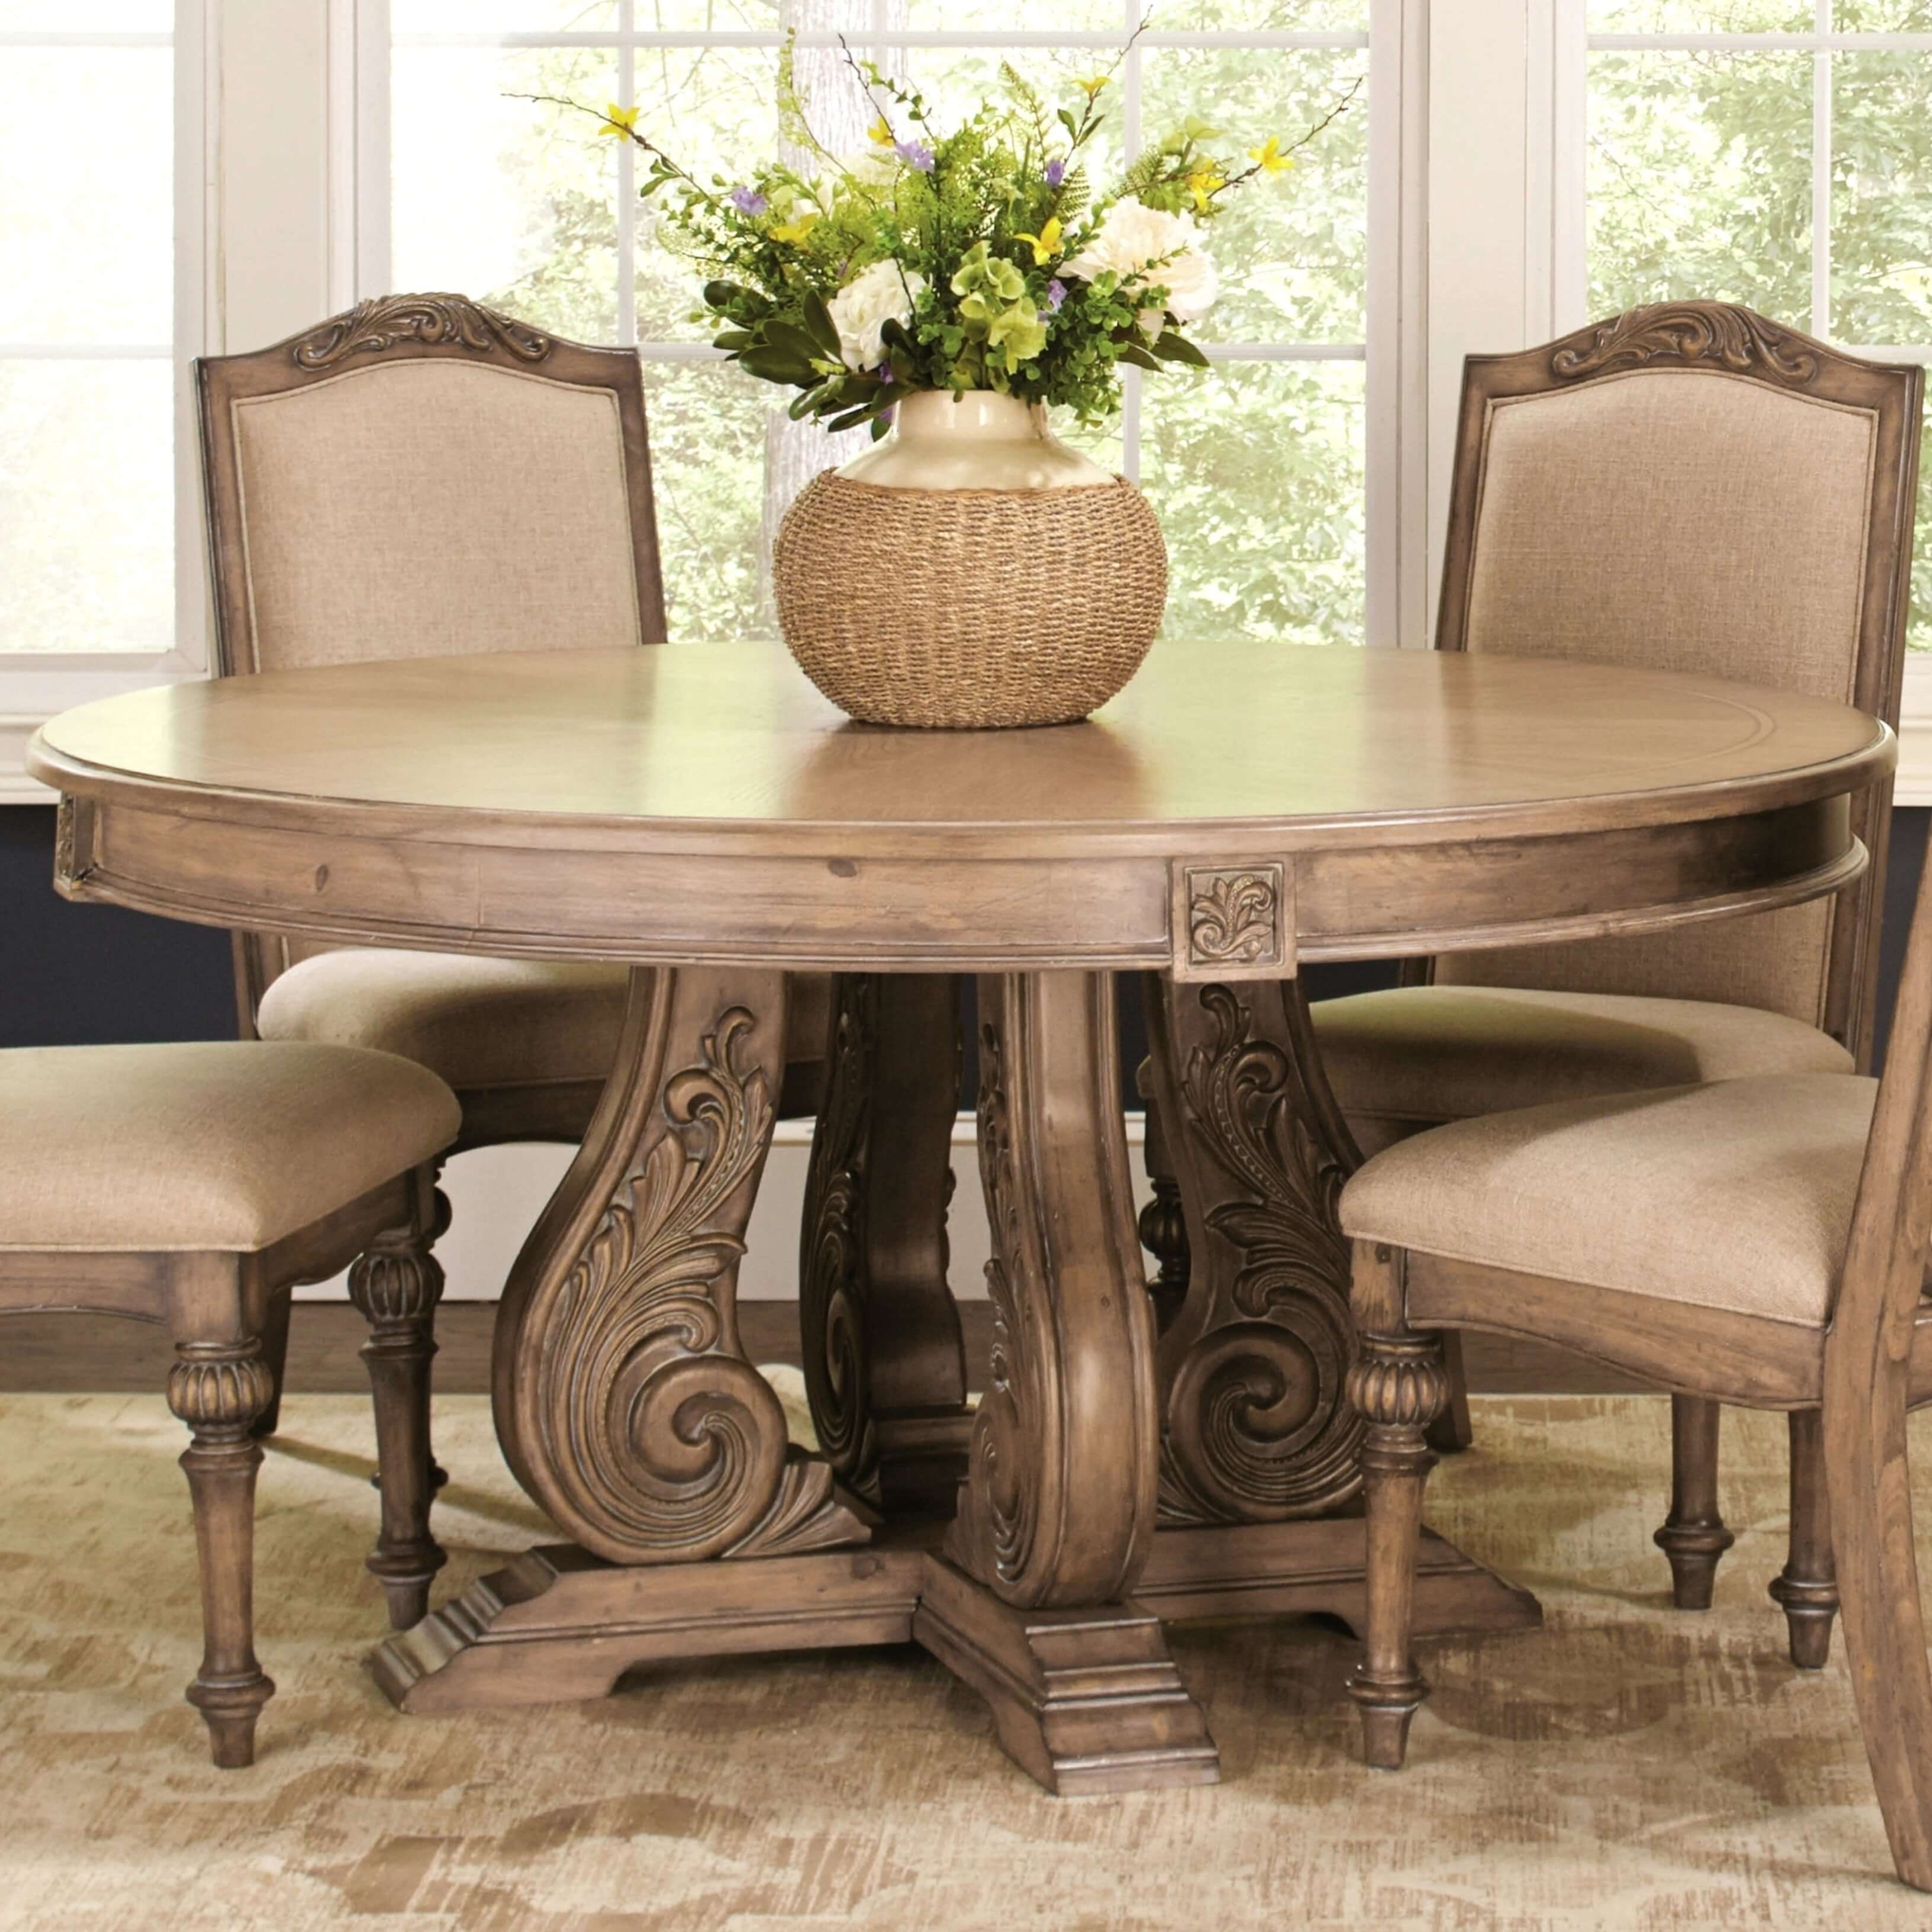 A round dining room table with a vase of flowers on top of it
